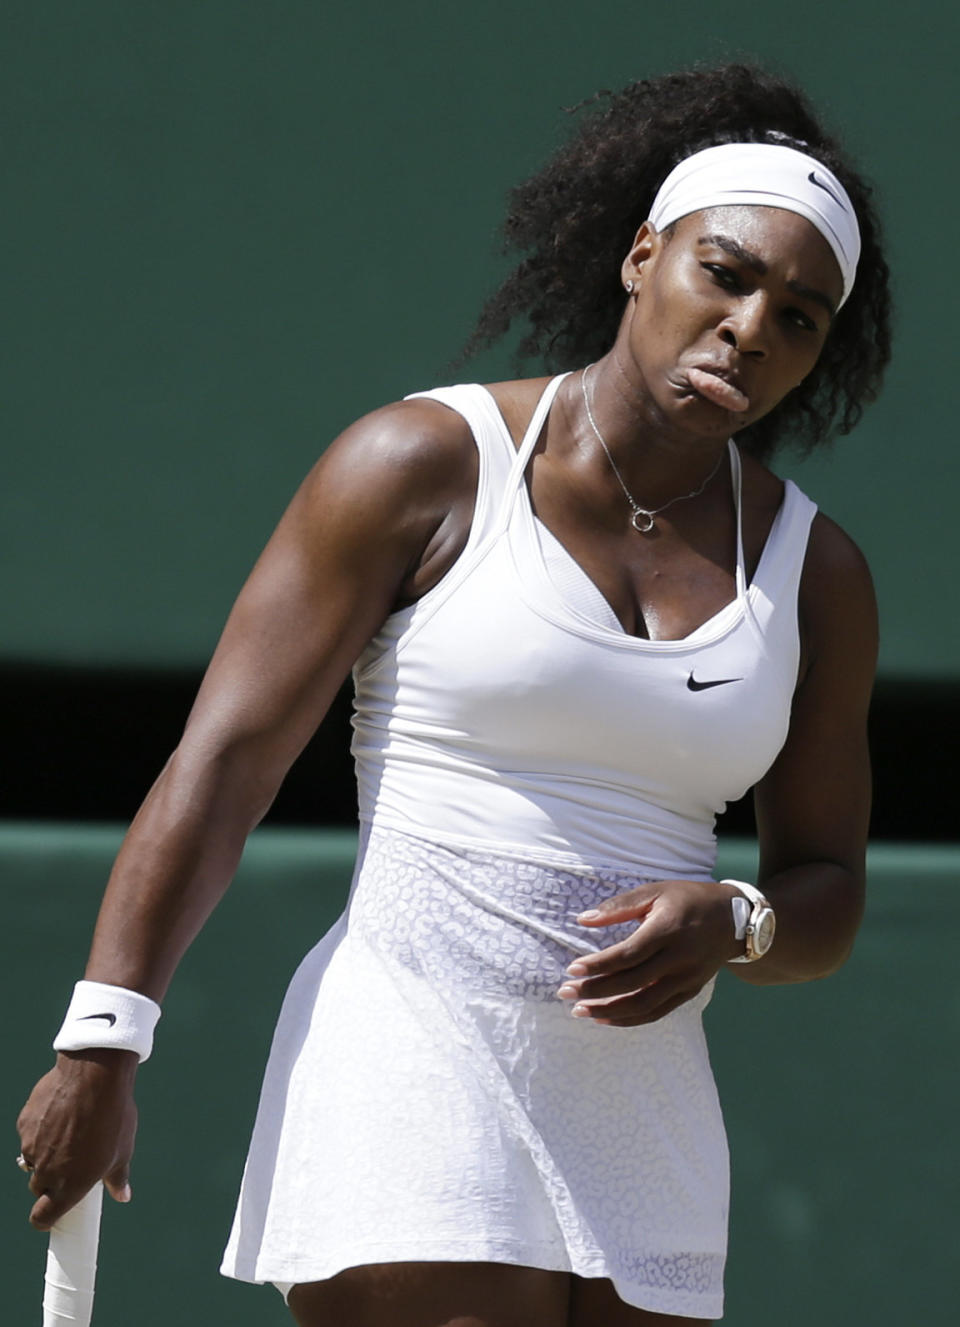 Serena Williams of the United States reacts after a point, during the women's singles final against  Garbine Muguruza of Spain, at the All England Lawn Tennis Championships in Wimbledon, London, Saturday July 11, 2015. (AP Photo/Pavel Golovkin)